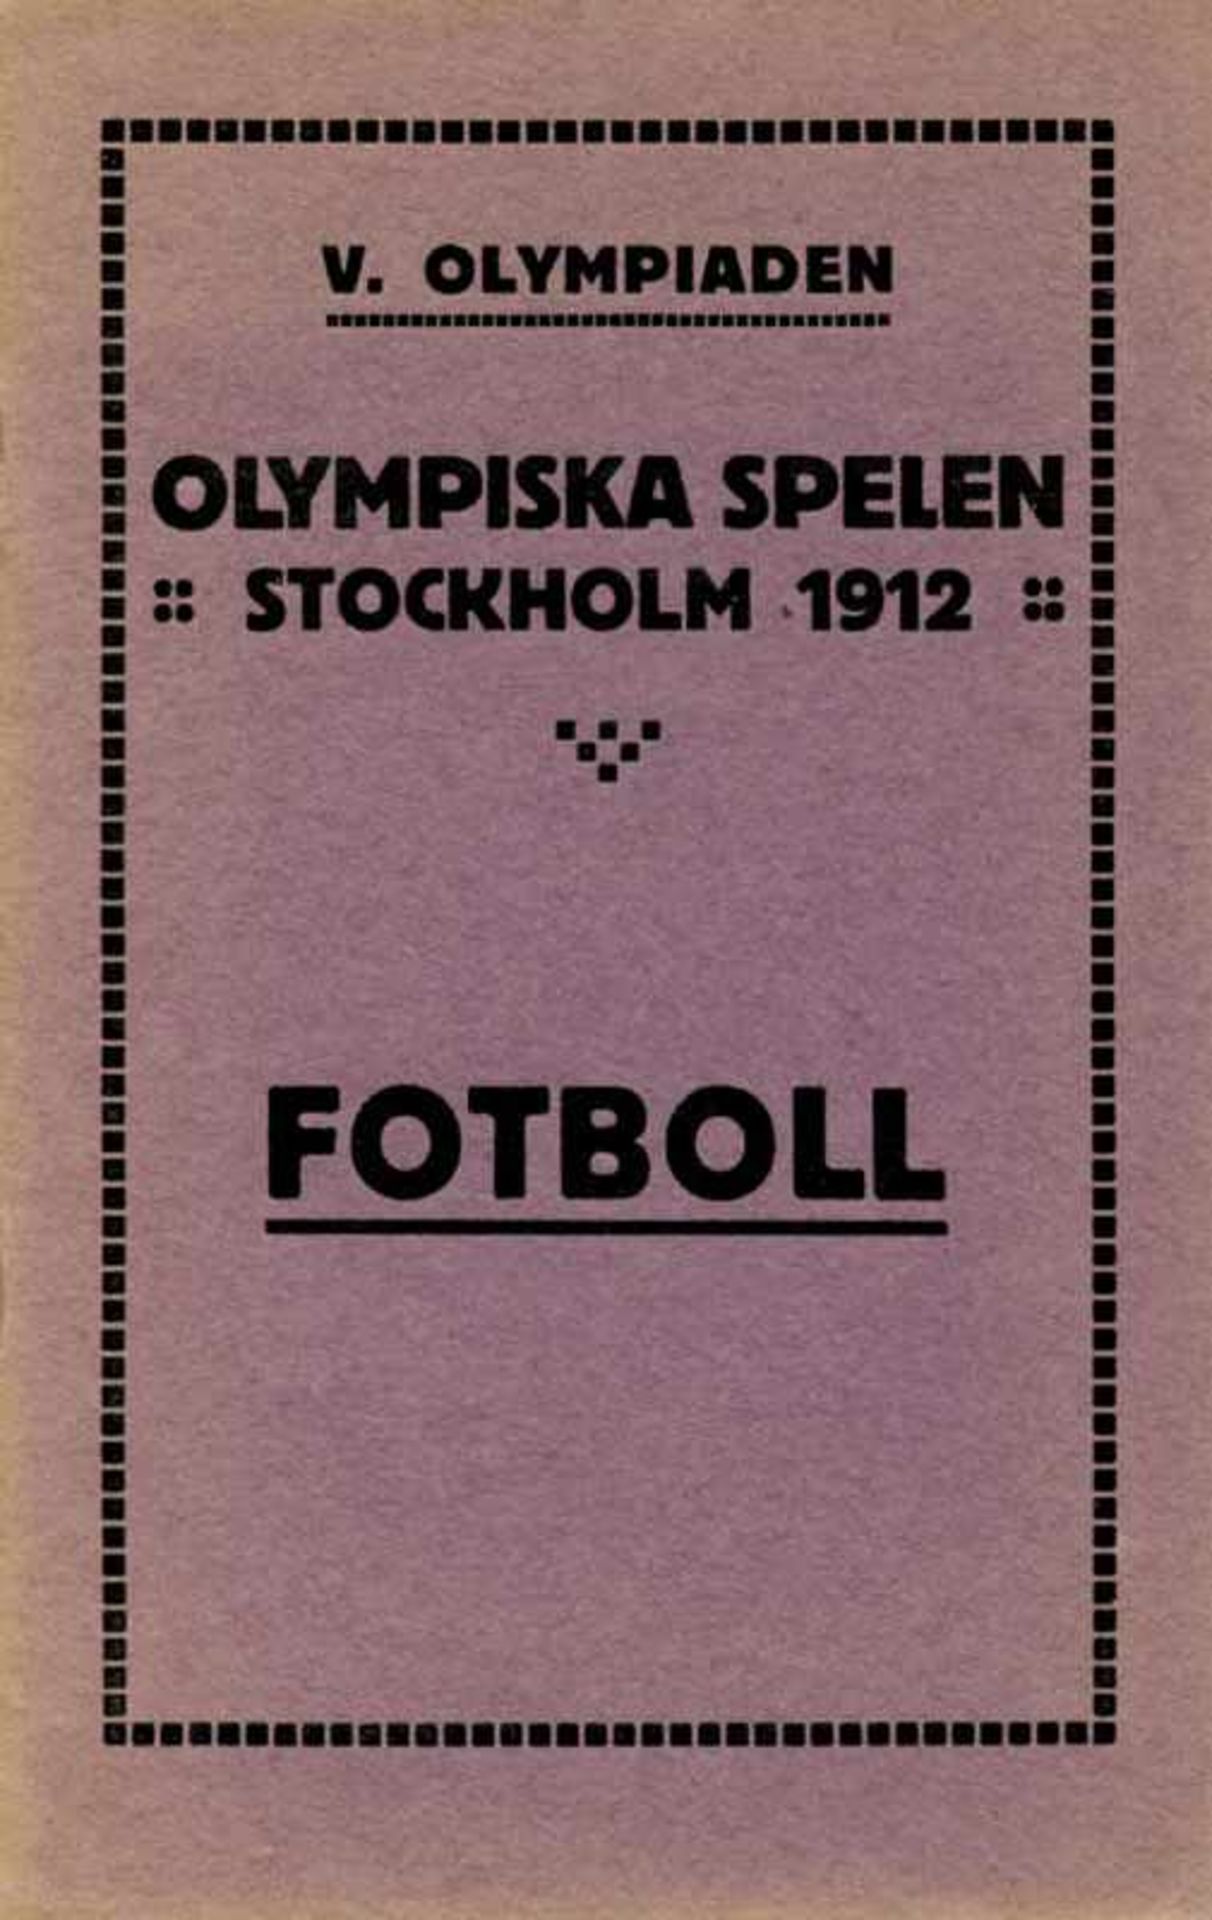 Olympic Games 1912 Football Programm + Regulation - Swedish edition of the general programme and